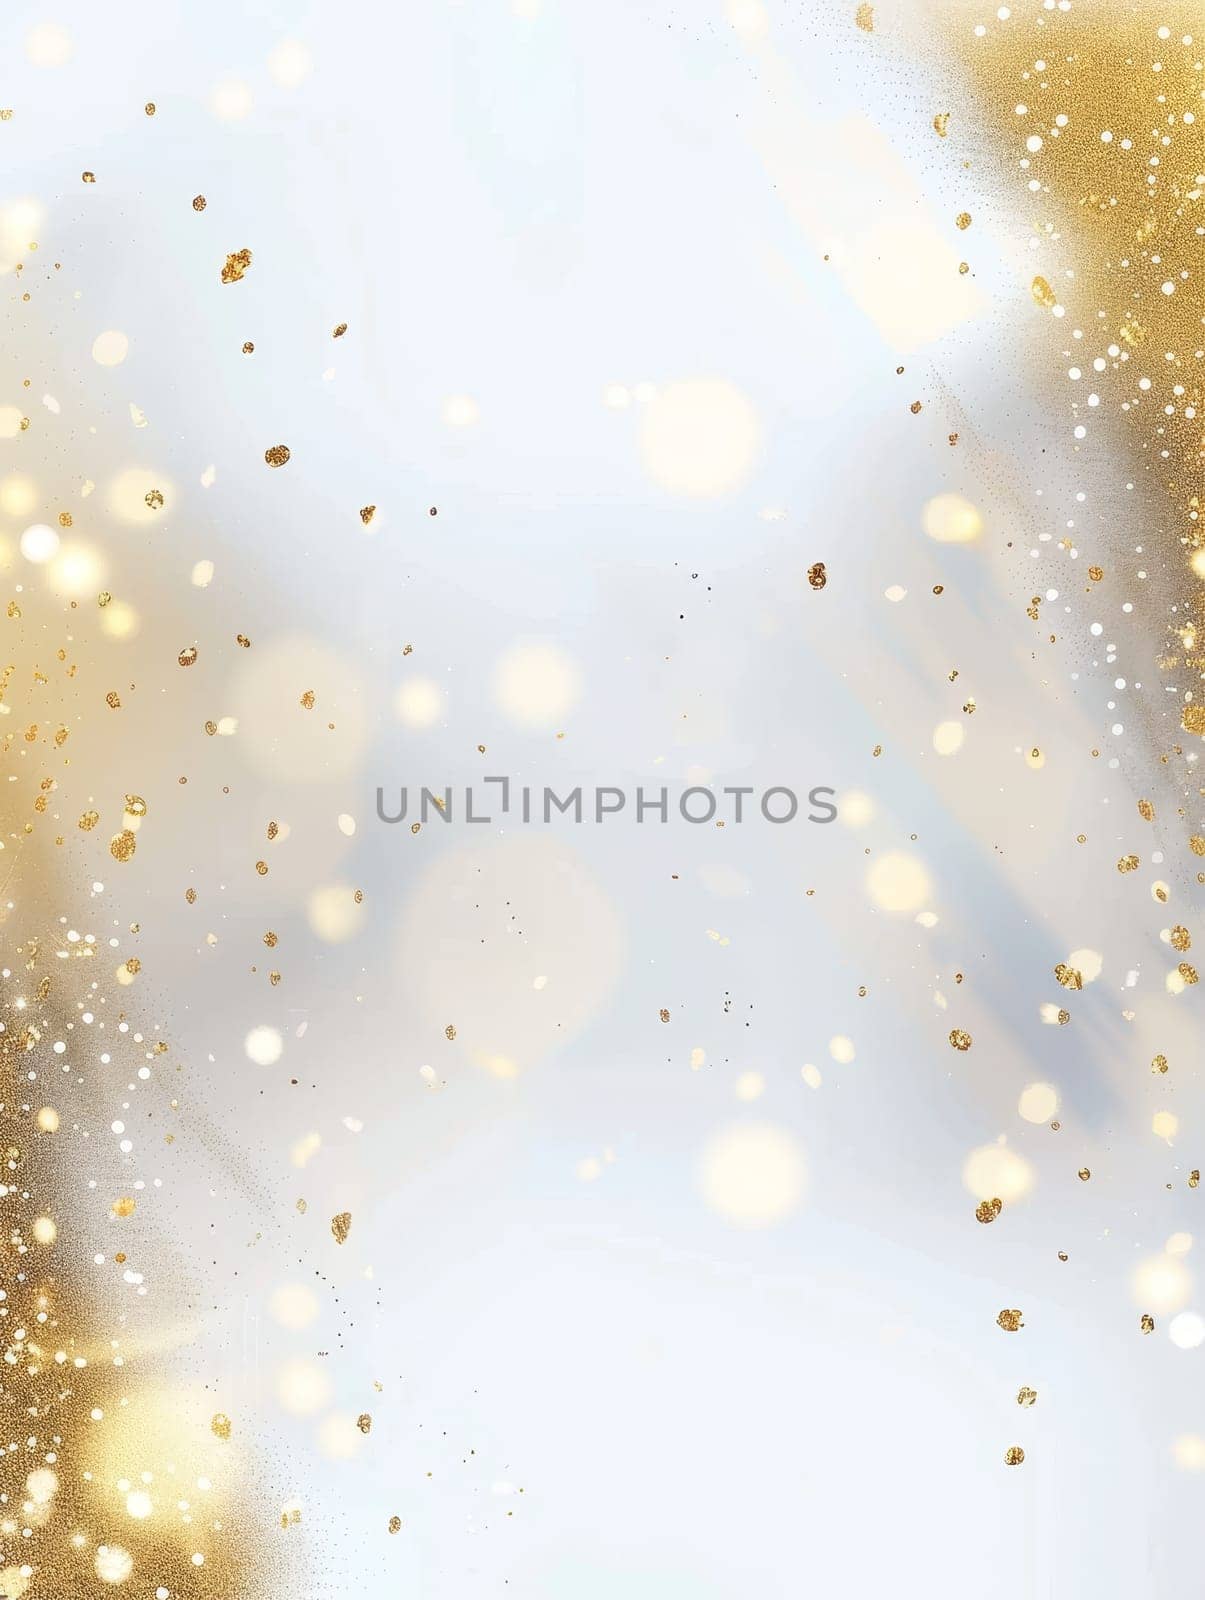 Sparkling gold dust and glitter create a magical winter atmosphere against a soft, snowy backdrop. The festive ambience evokes the spirit of holiday celebrations. by sfinks